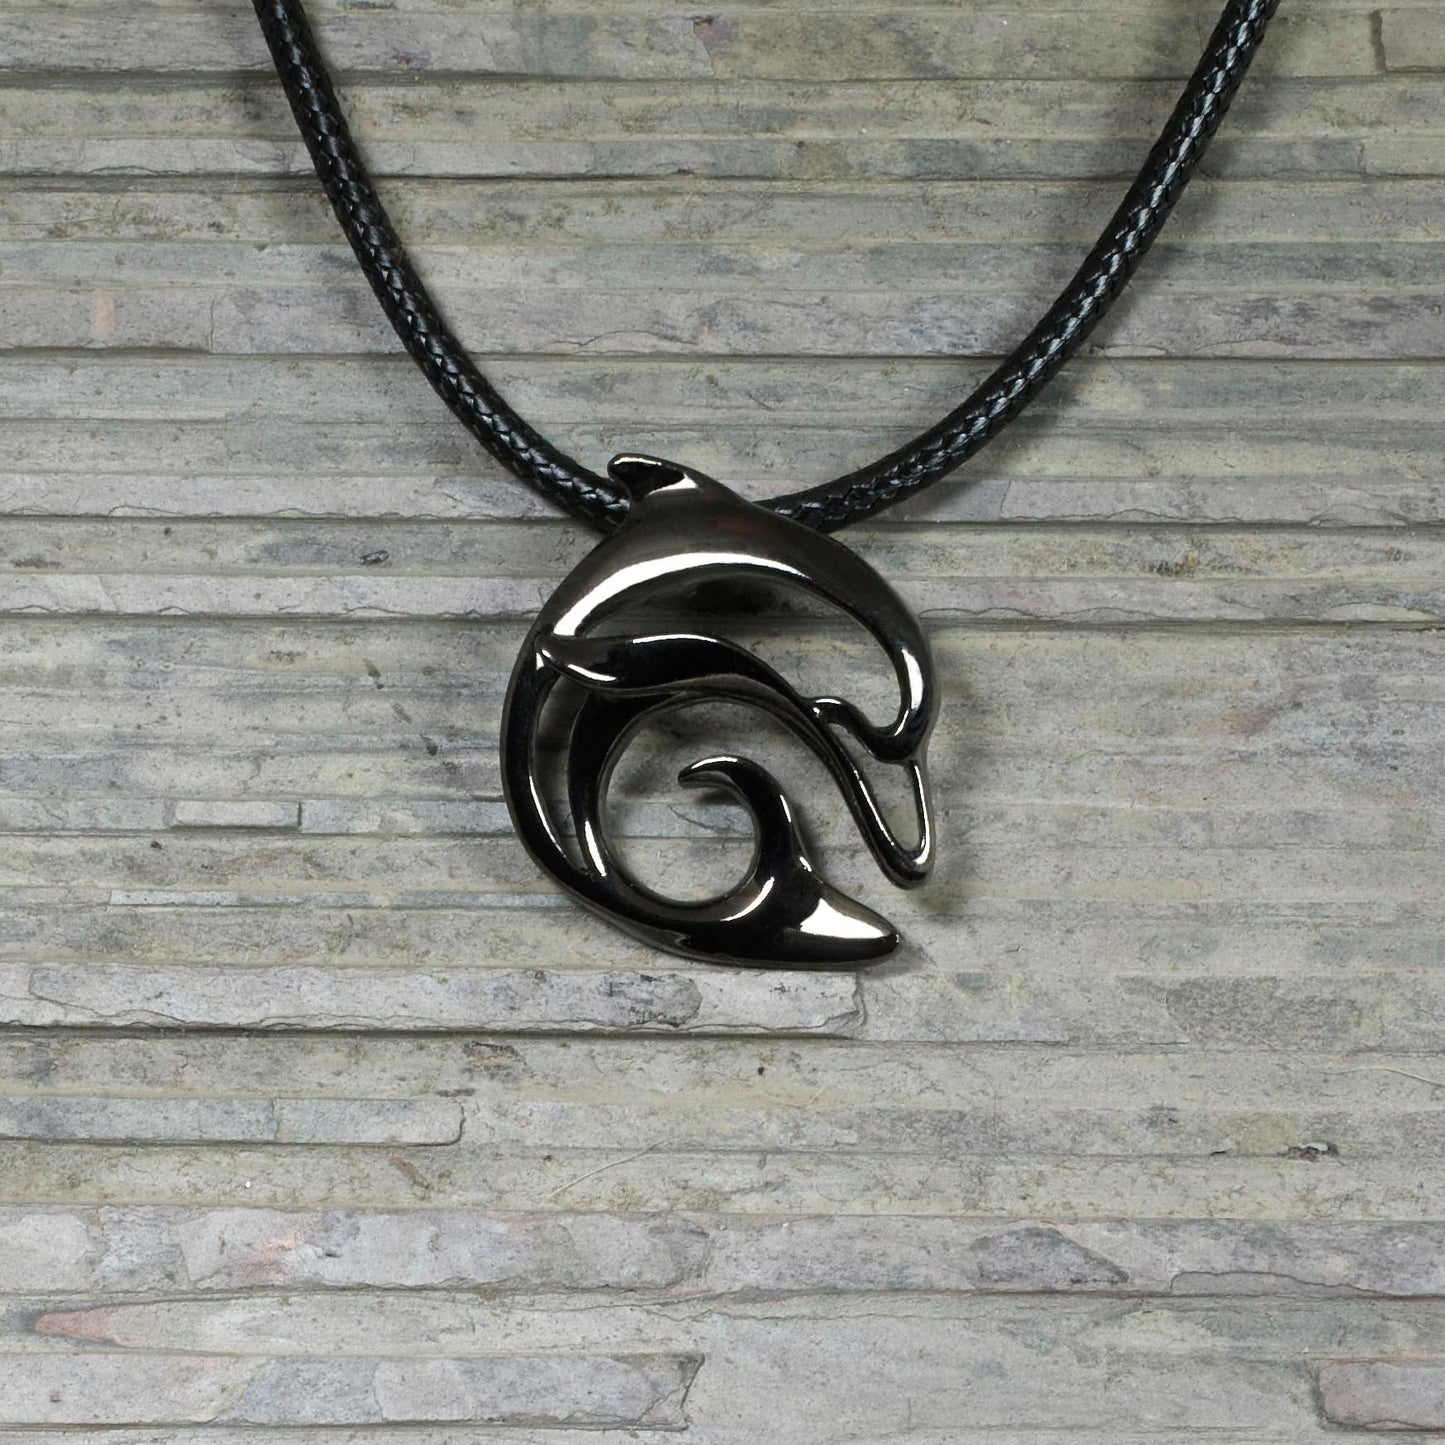 Dolphin Necklace for Men and Women- Hematite Dolphin Pendant for Men, Dolphin Charm Hematite, Dolphin Jewelry for Women, Jet Black  Jewelry - The Tool Store